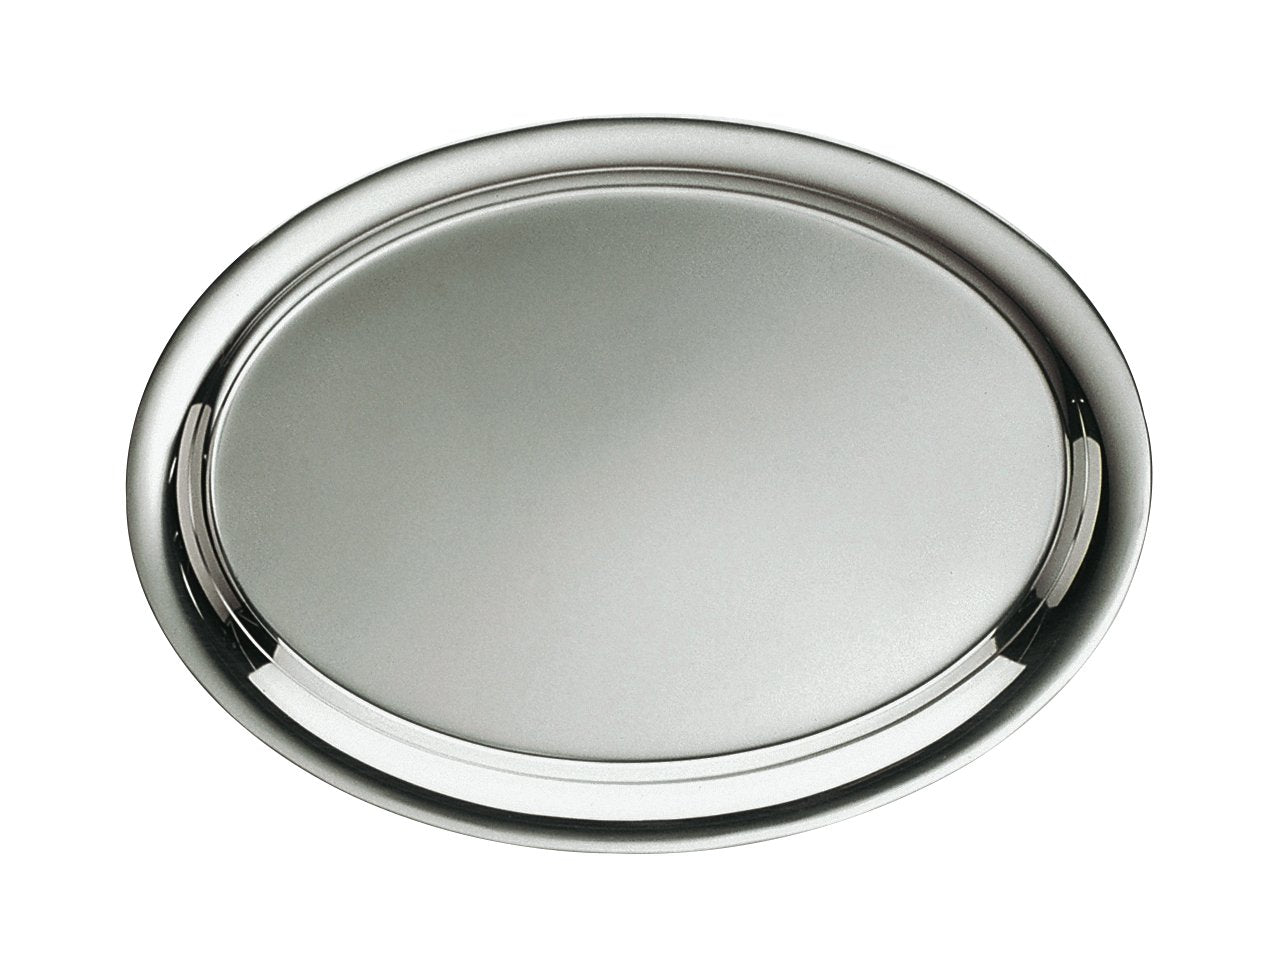 Serving tray, oval, 32.3 x 24 cm